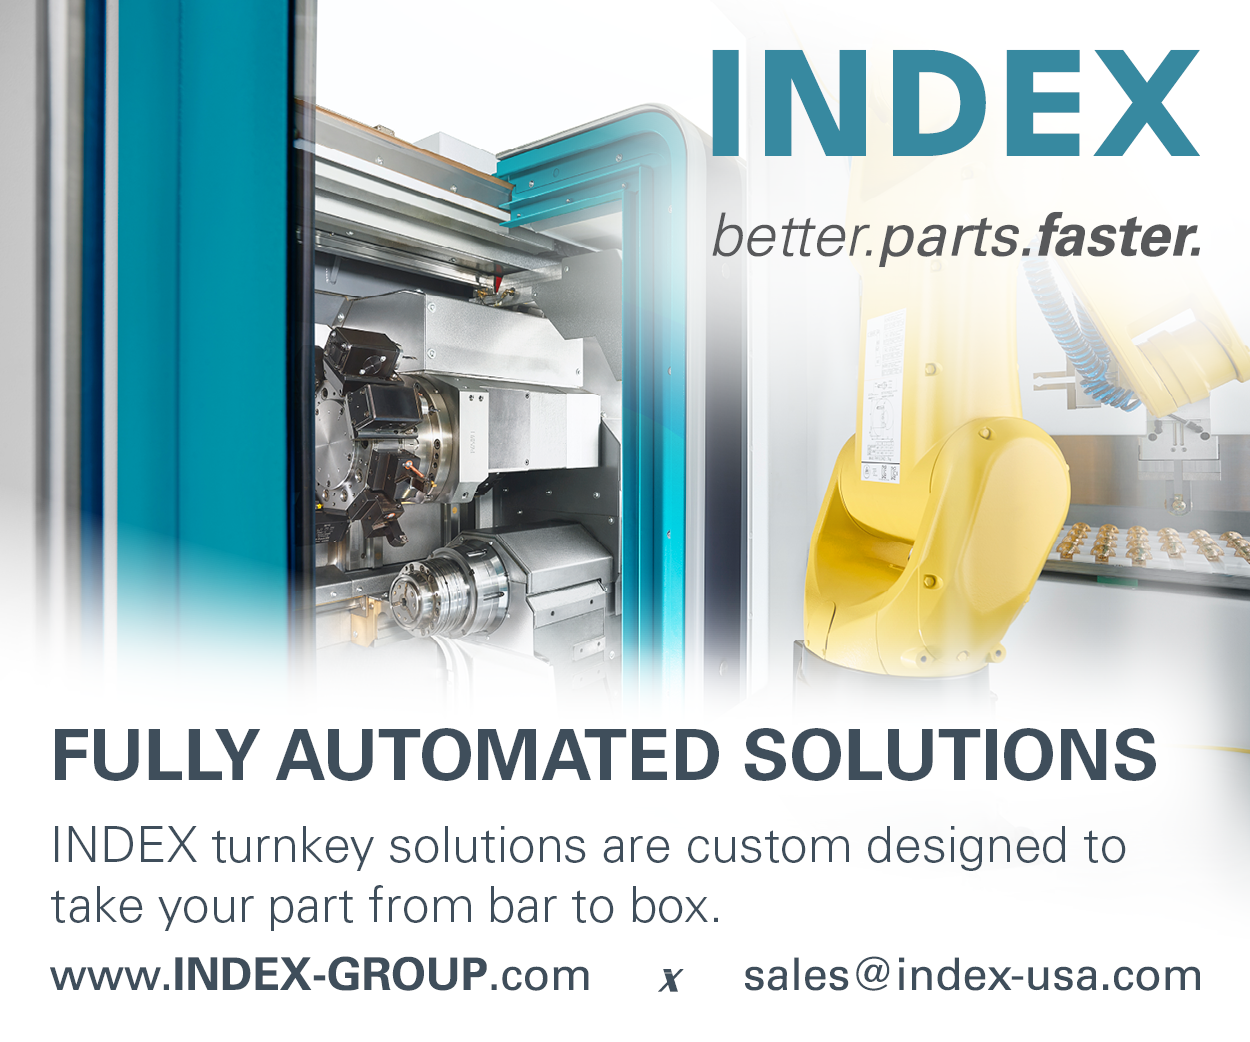 Index fully automated solutions